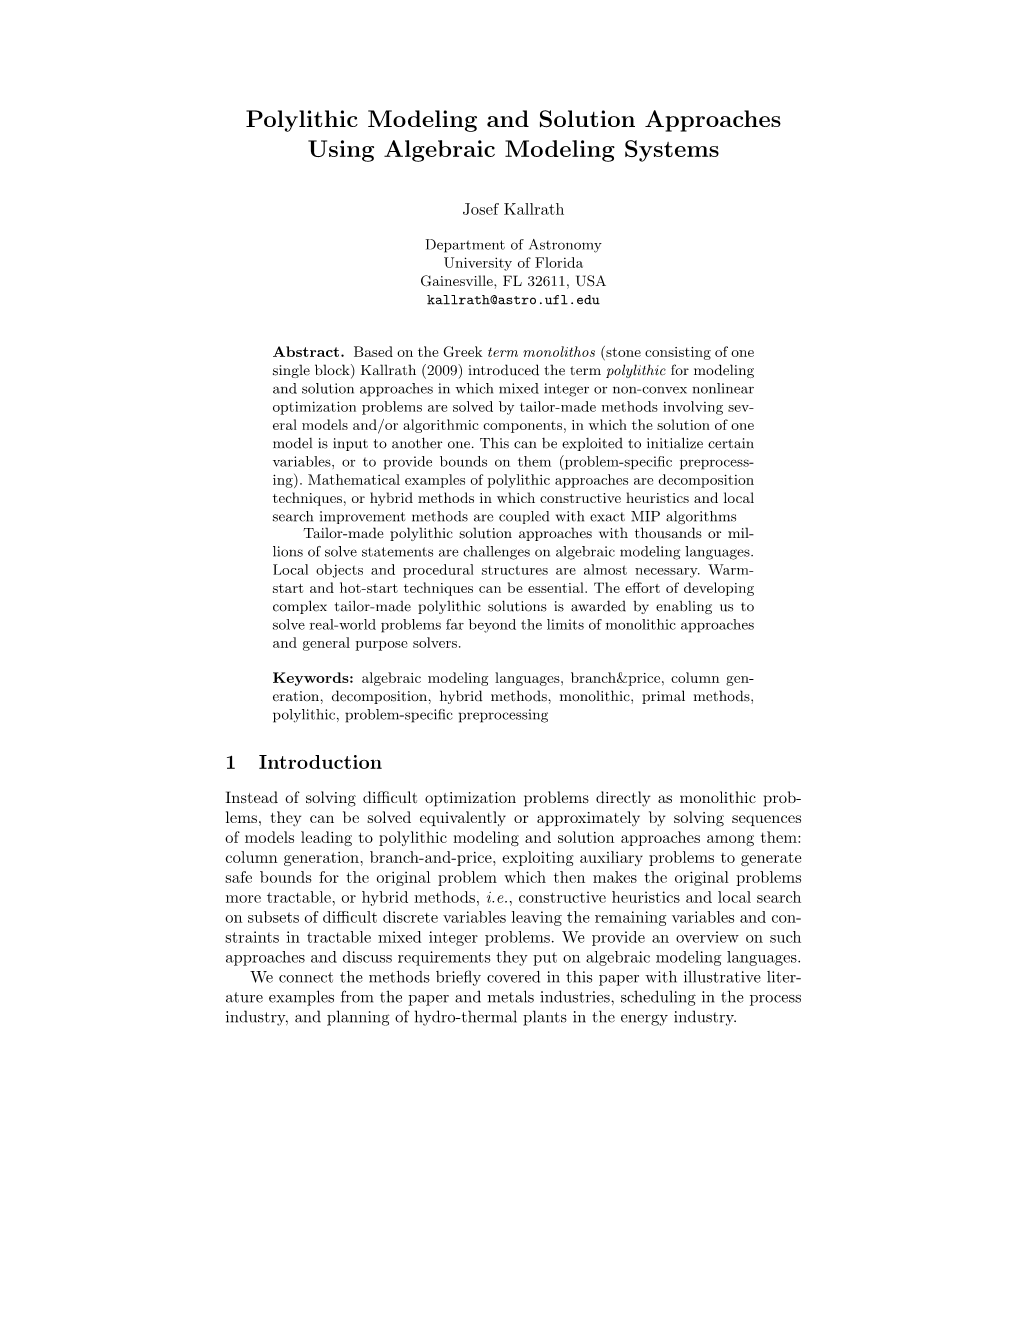 Polylithic Modeling and Solution Approaches Using Algebraic Modeling Systems